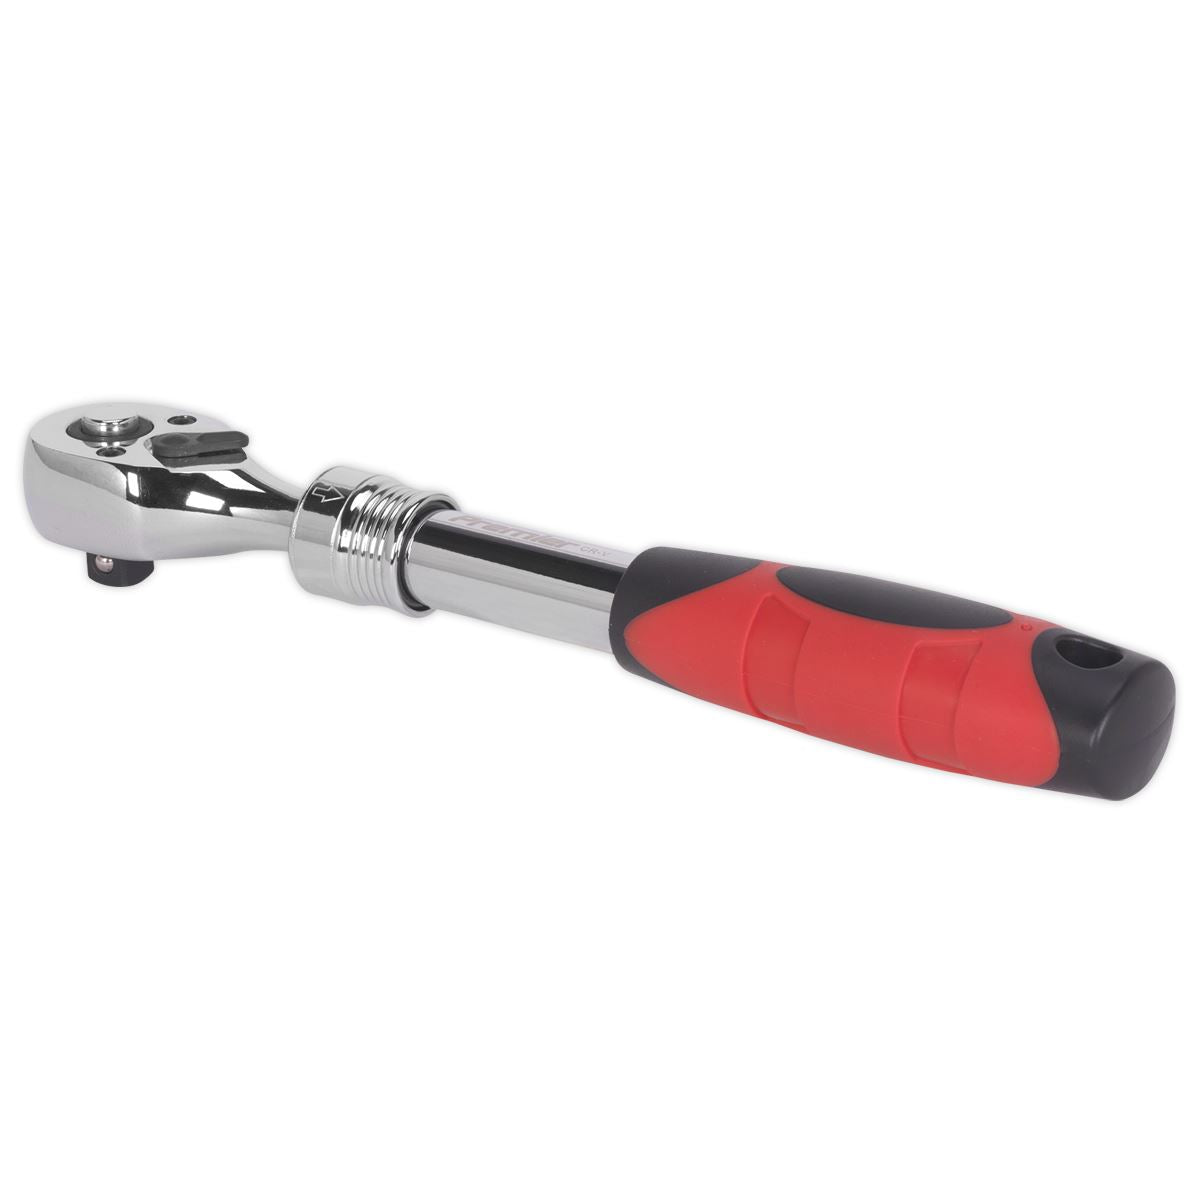 Sealey Premier Ratchet Wrench 3/8"Sq Drive Extendable